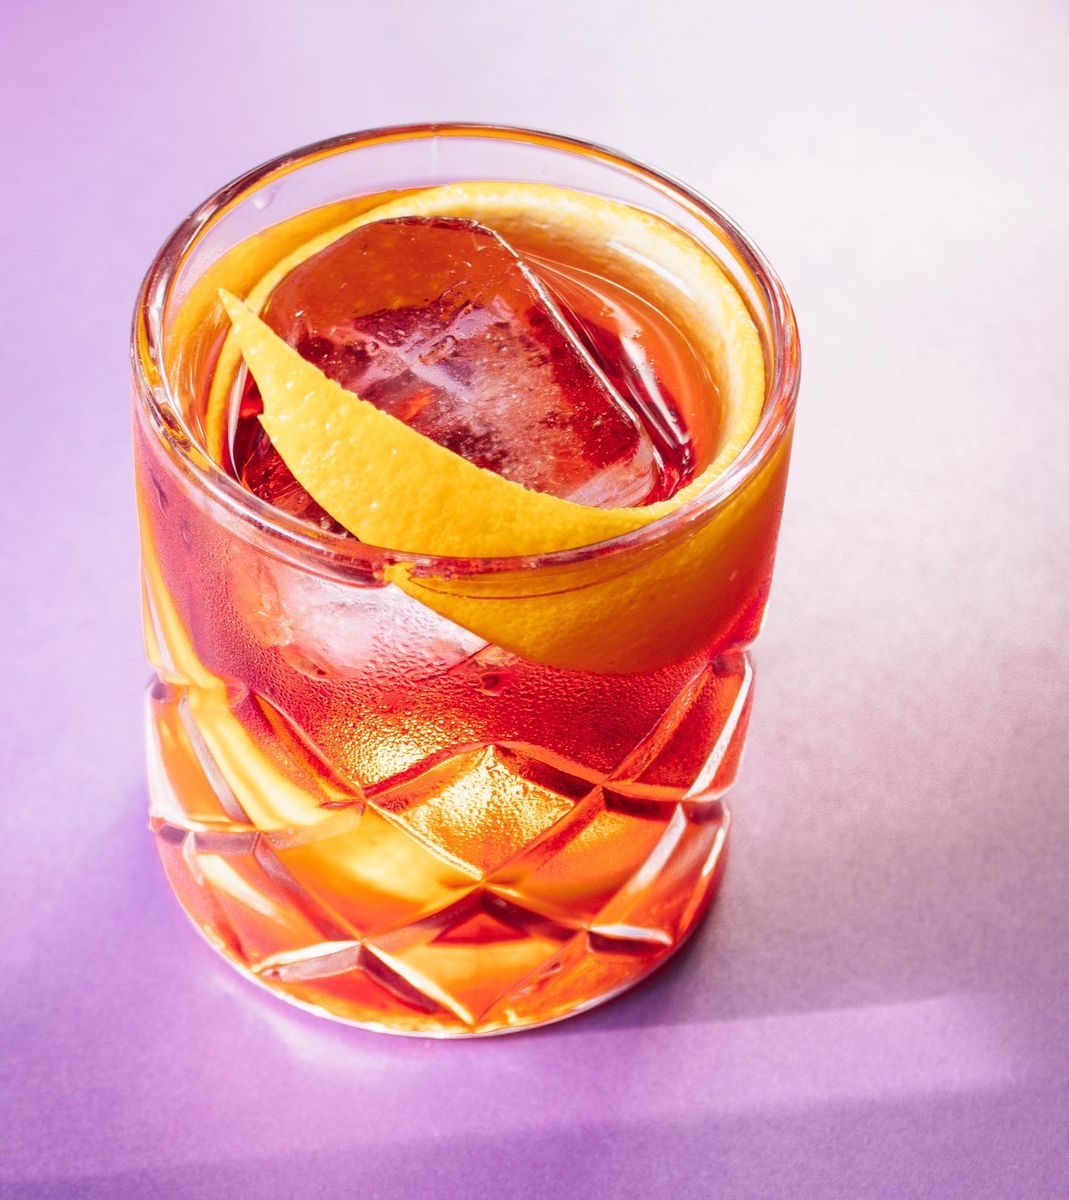 I'm not a Negroni fan normally but rum and coffee well get me to participate in many things!